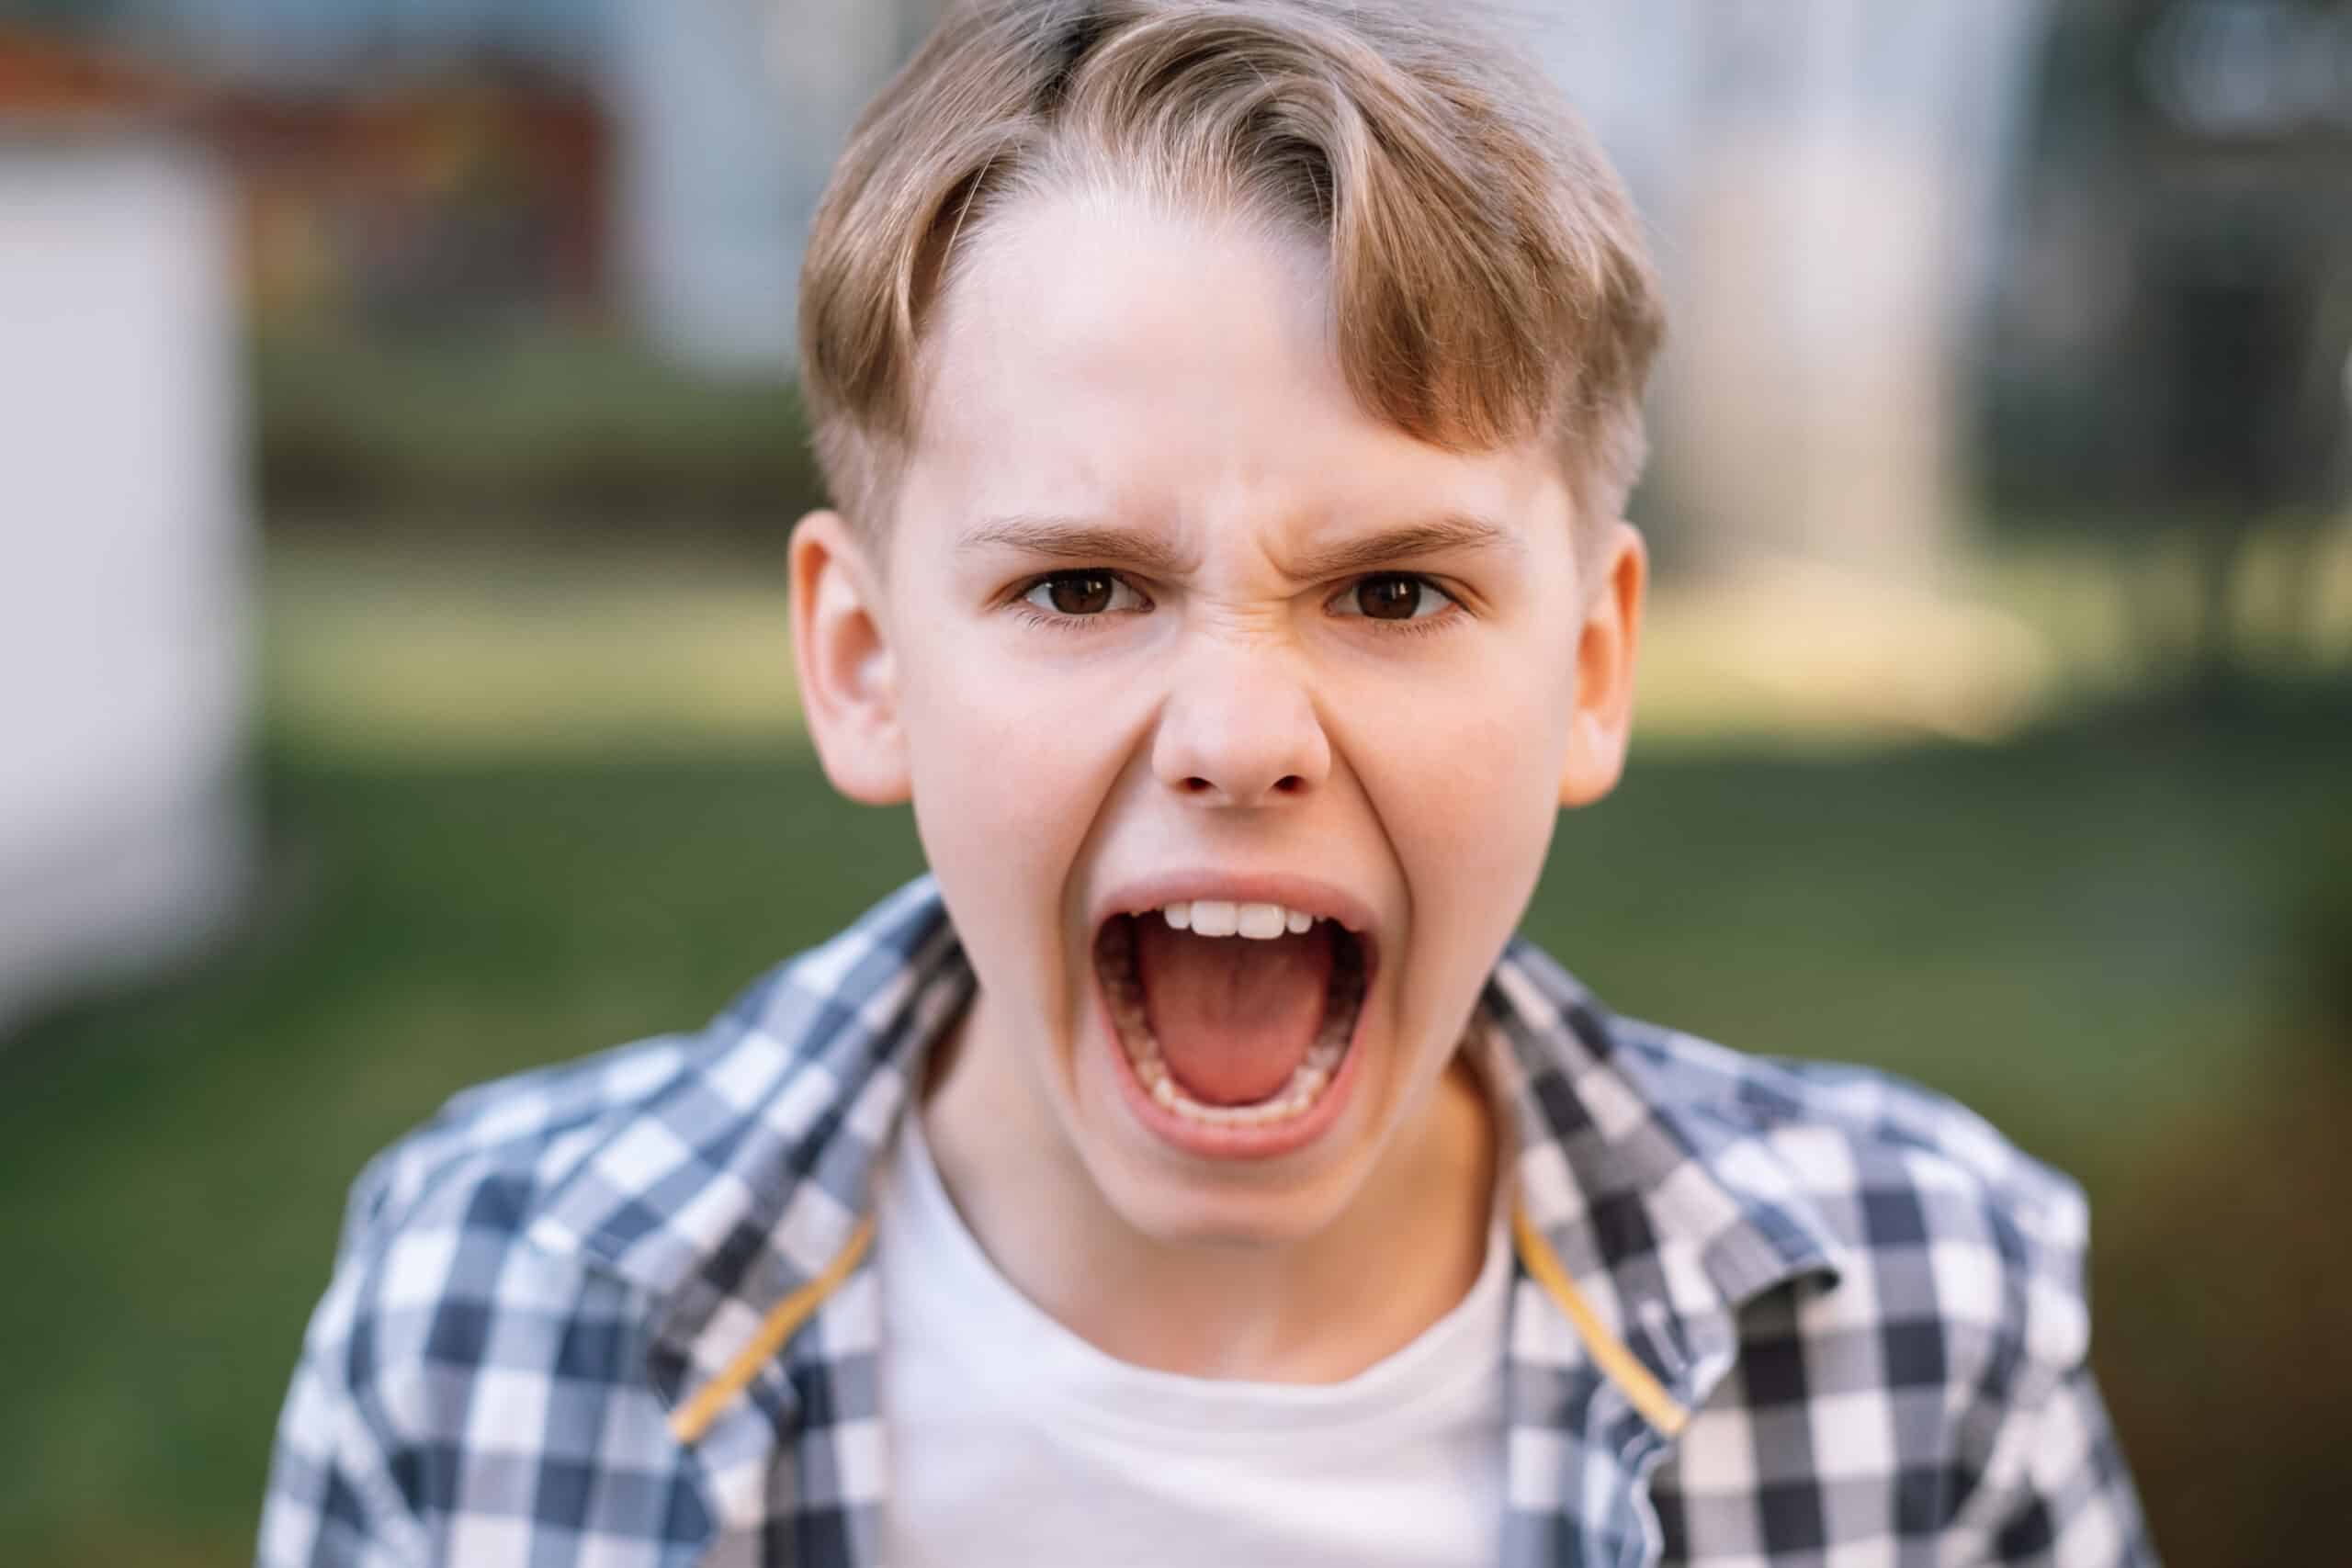 Boy yelling, a typical sign of anger issues.